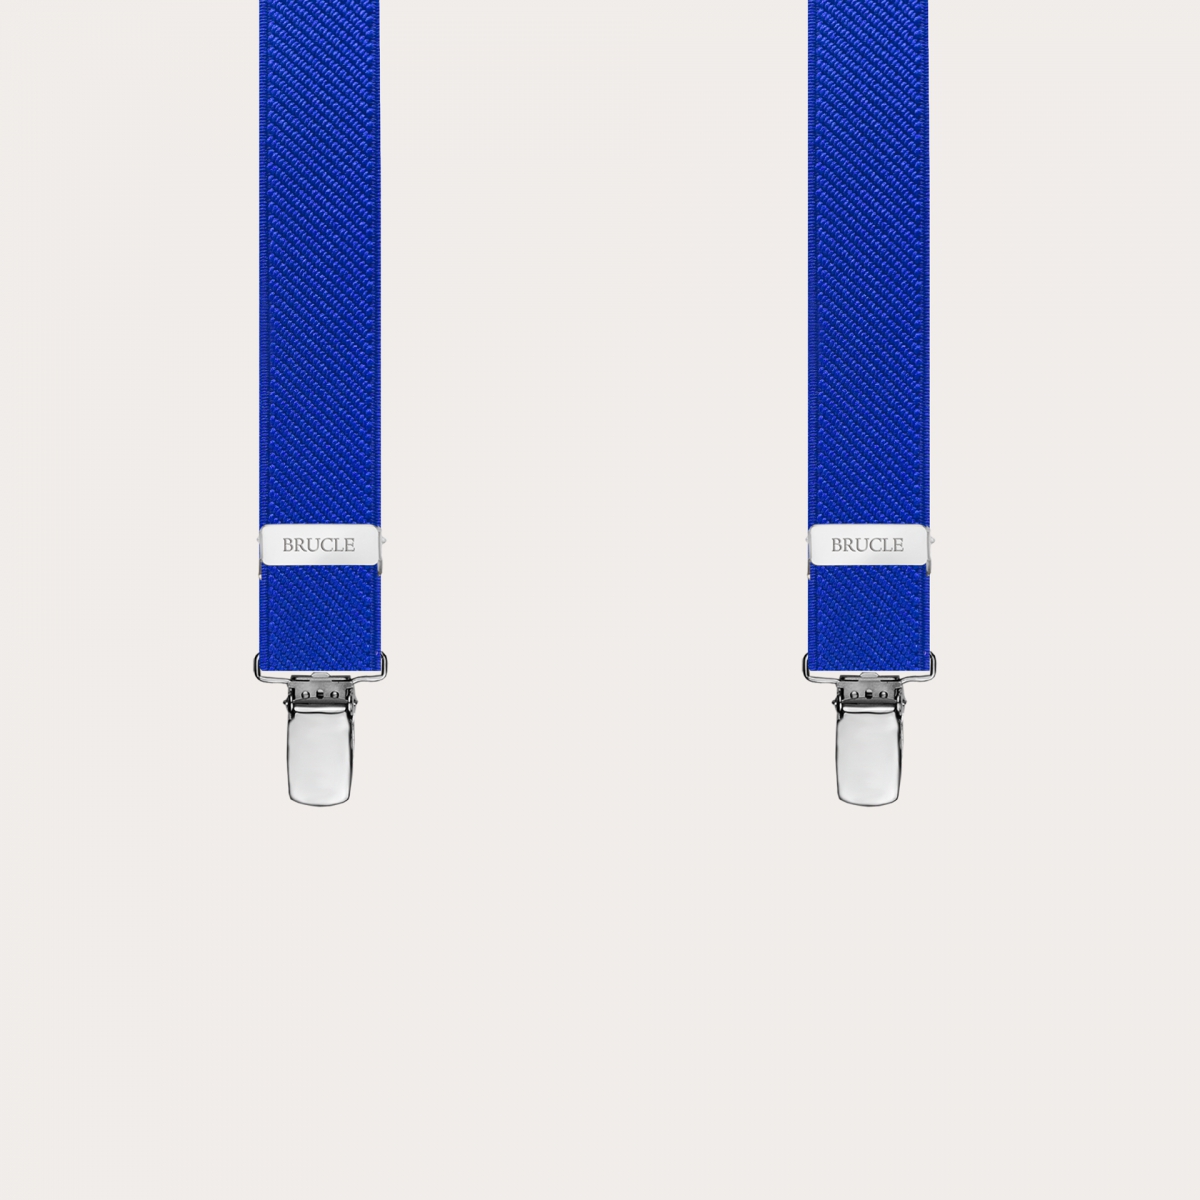 BRUCLE X-shaped suspenders for children and teenagers, royal blue